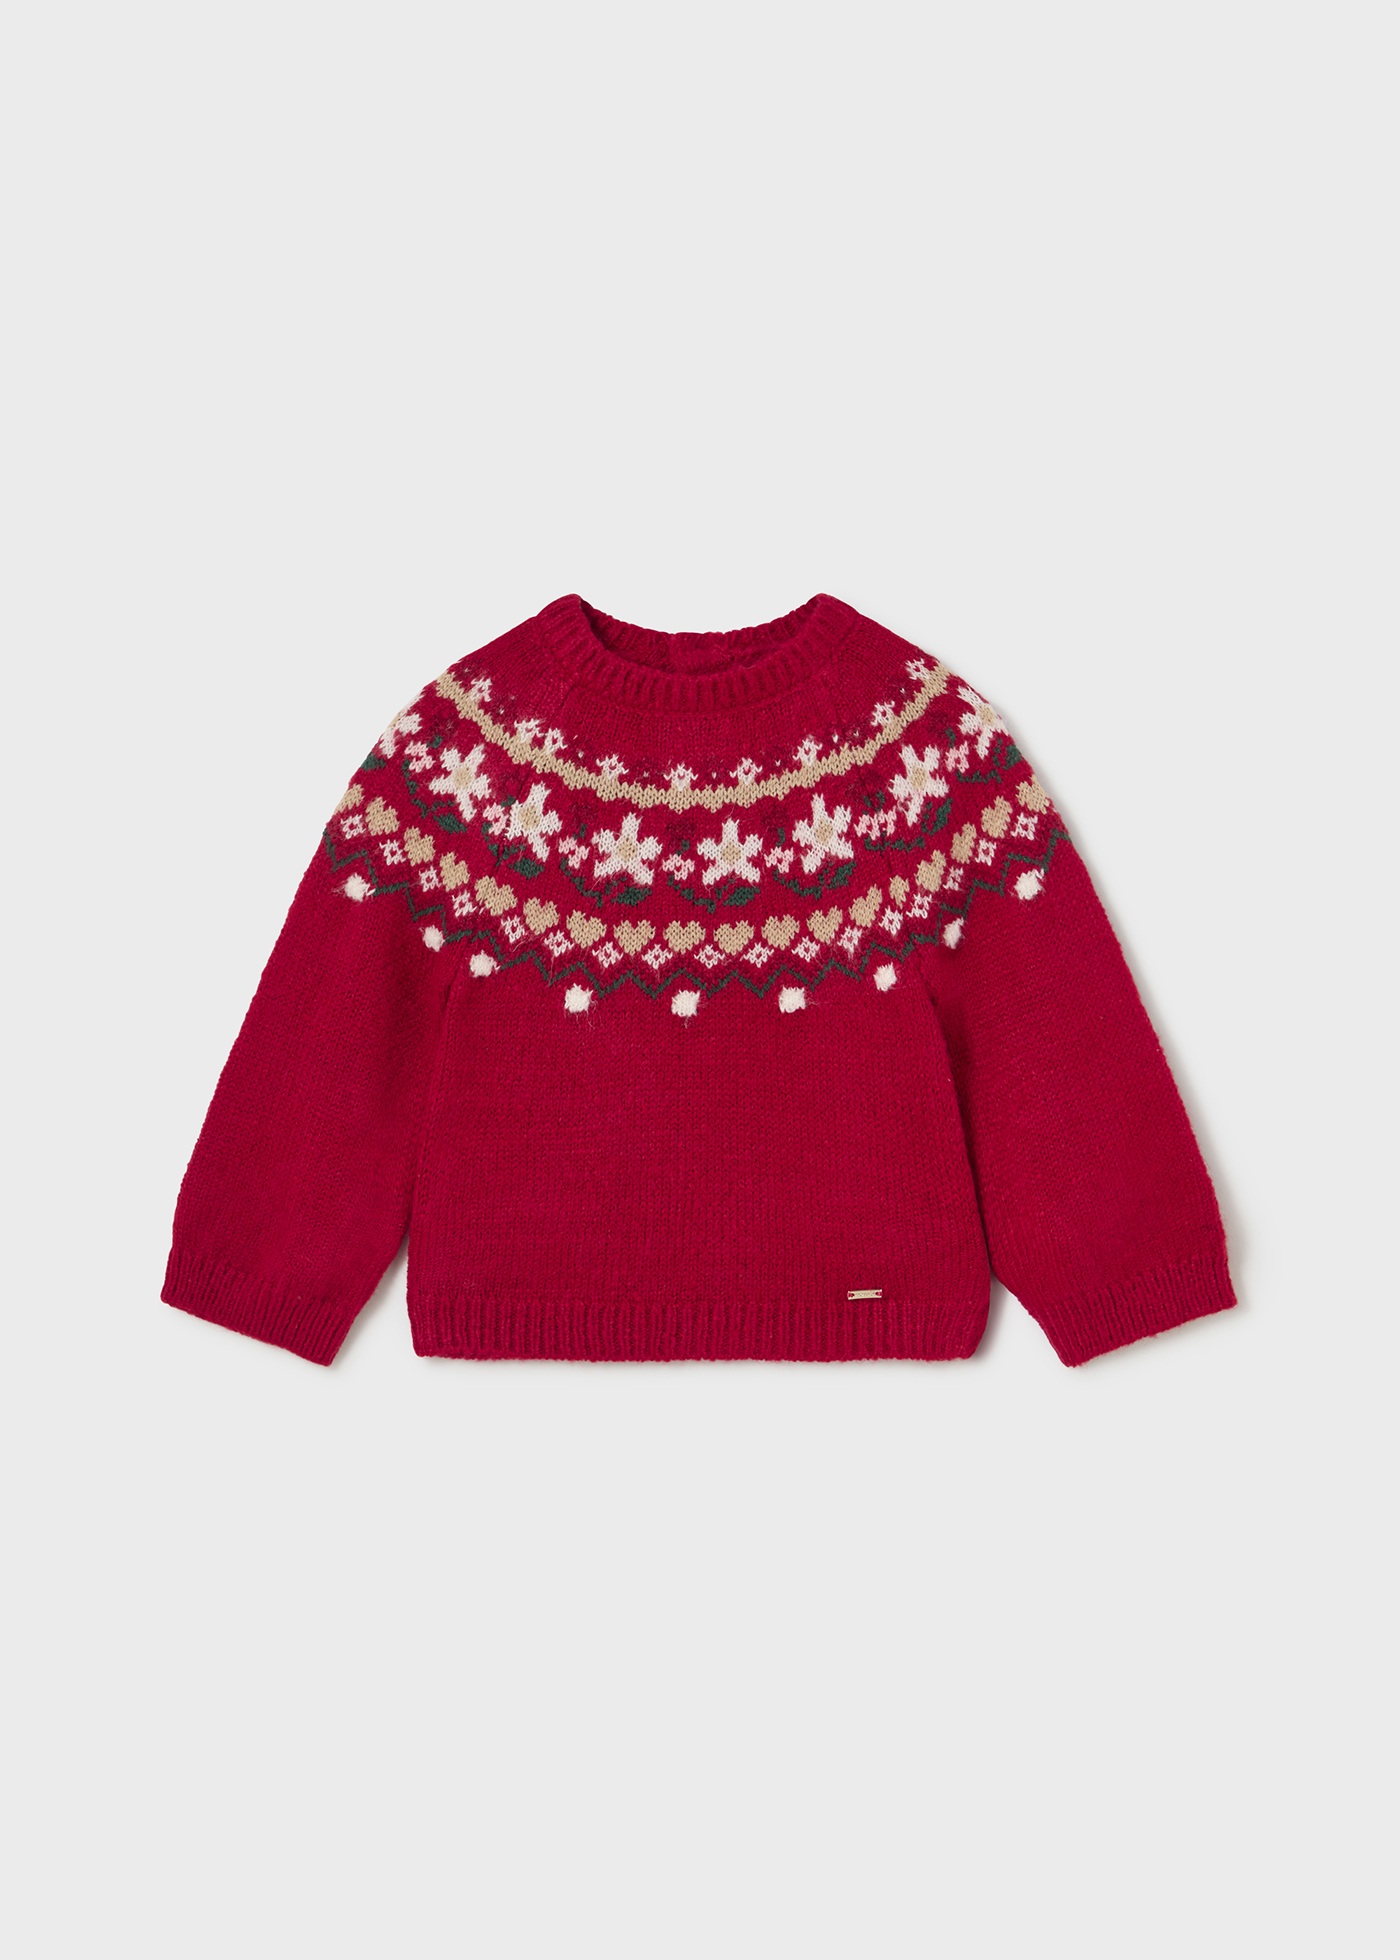 Baby jacquard sweater details | Mayoral